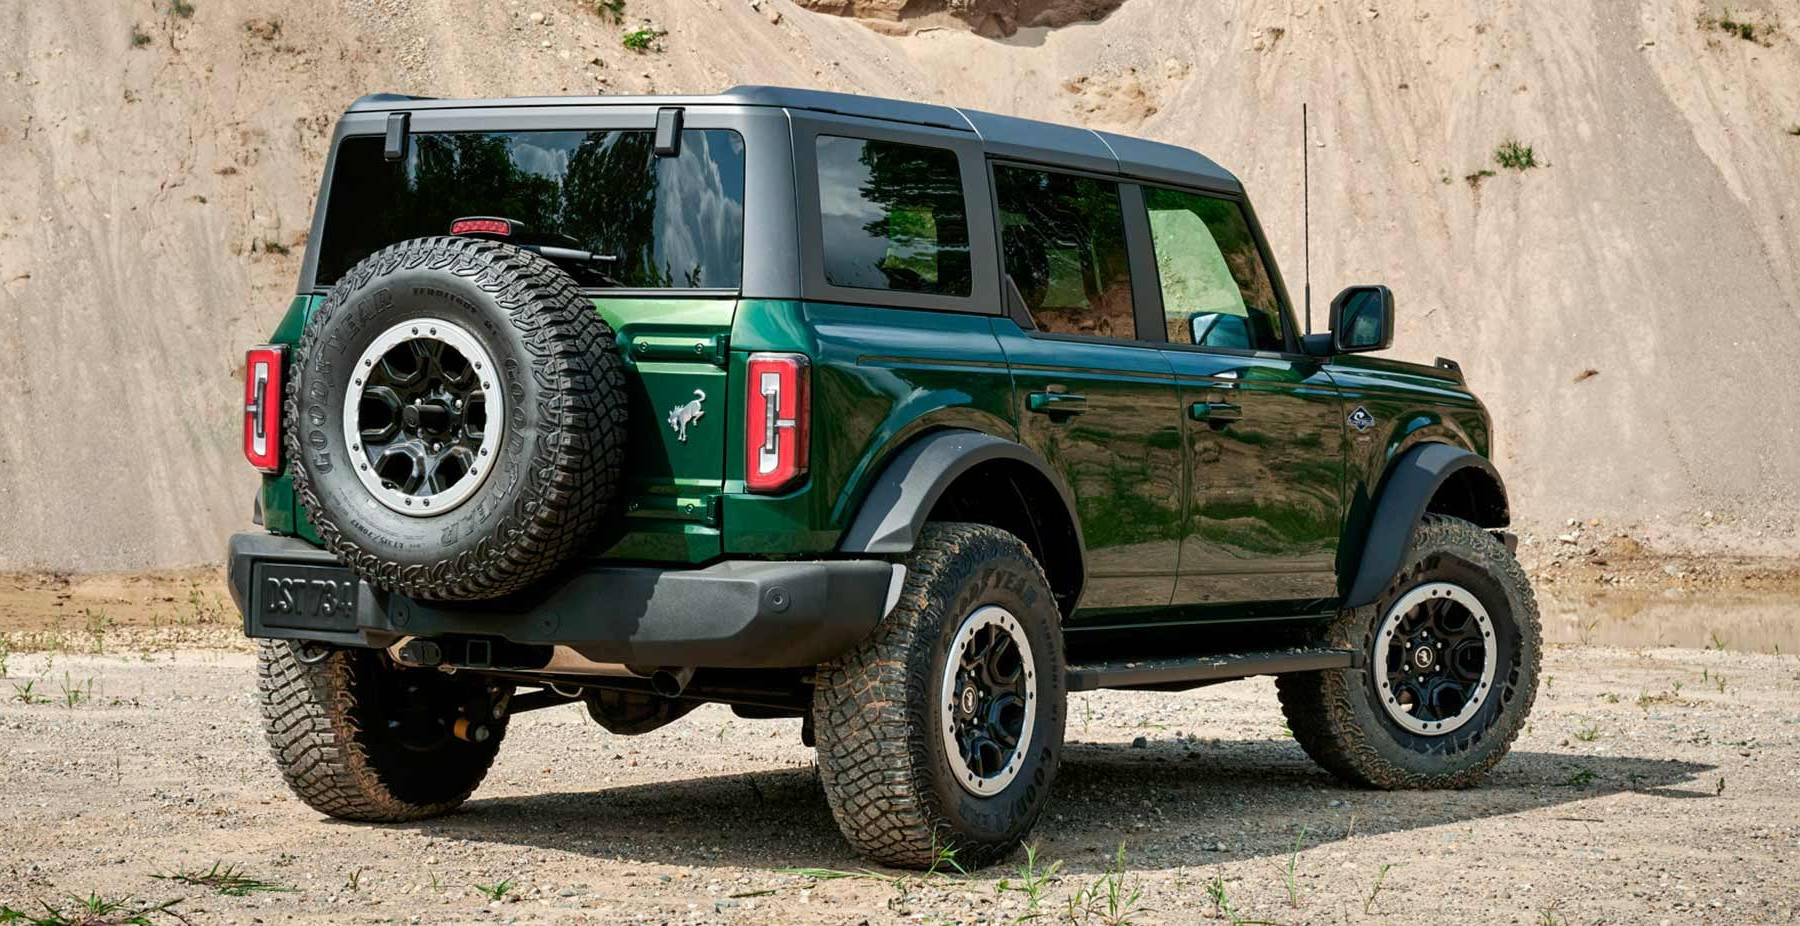 The 2021 Ford Bronco